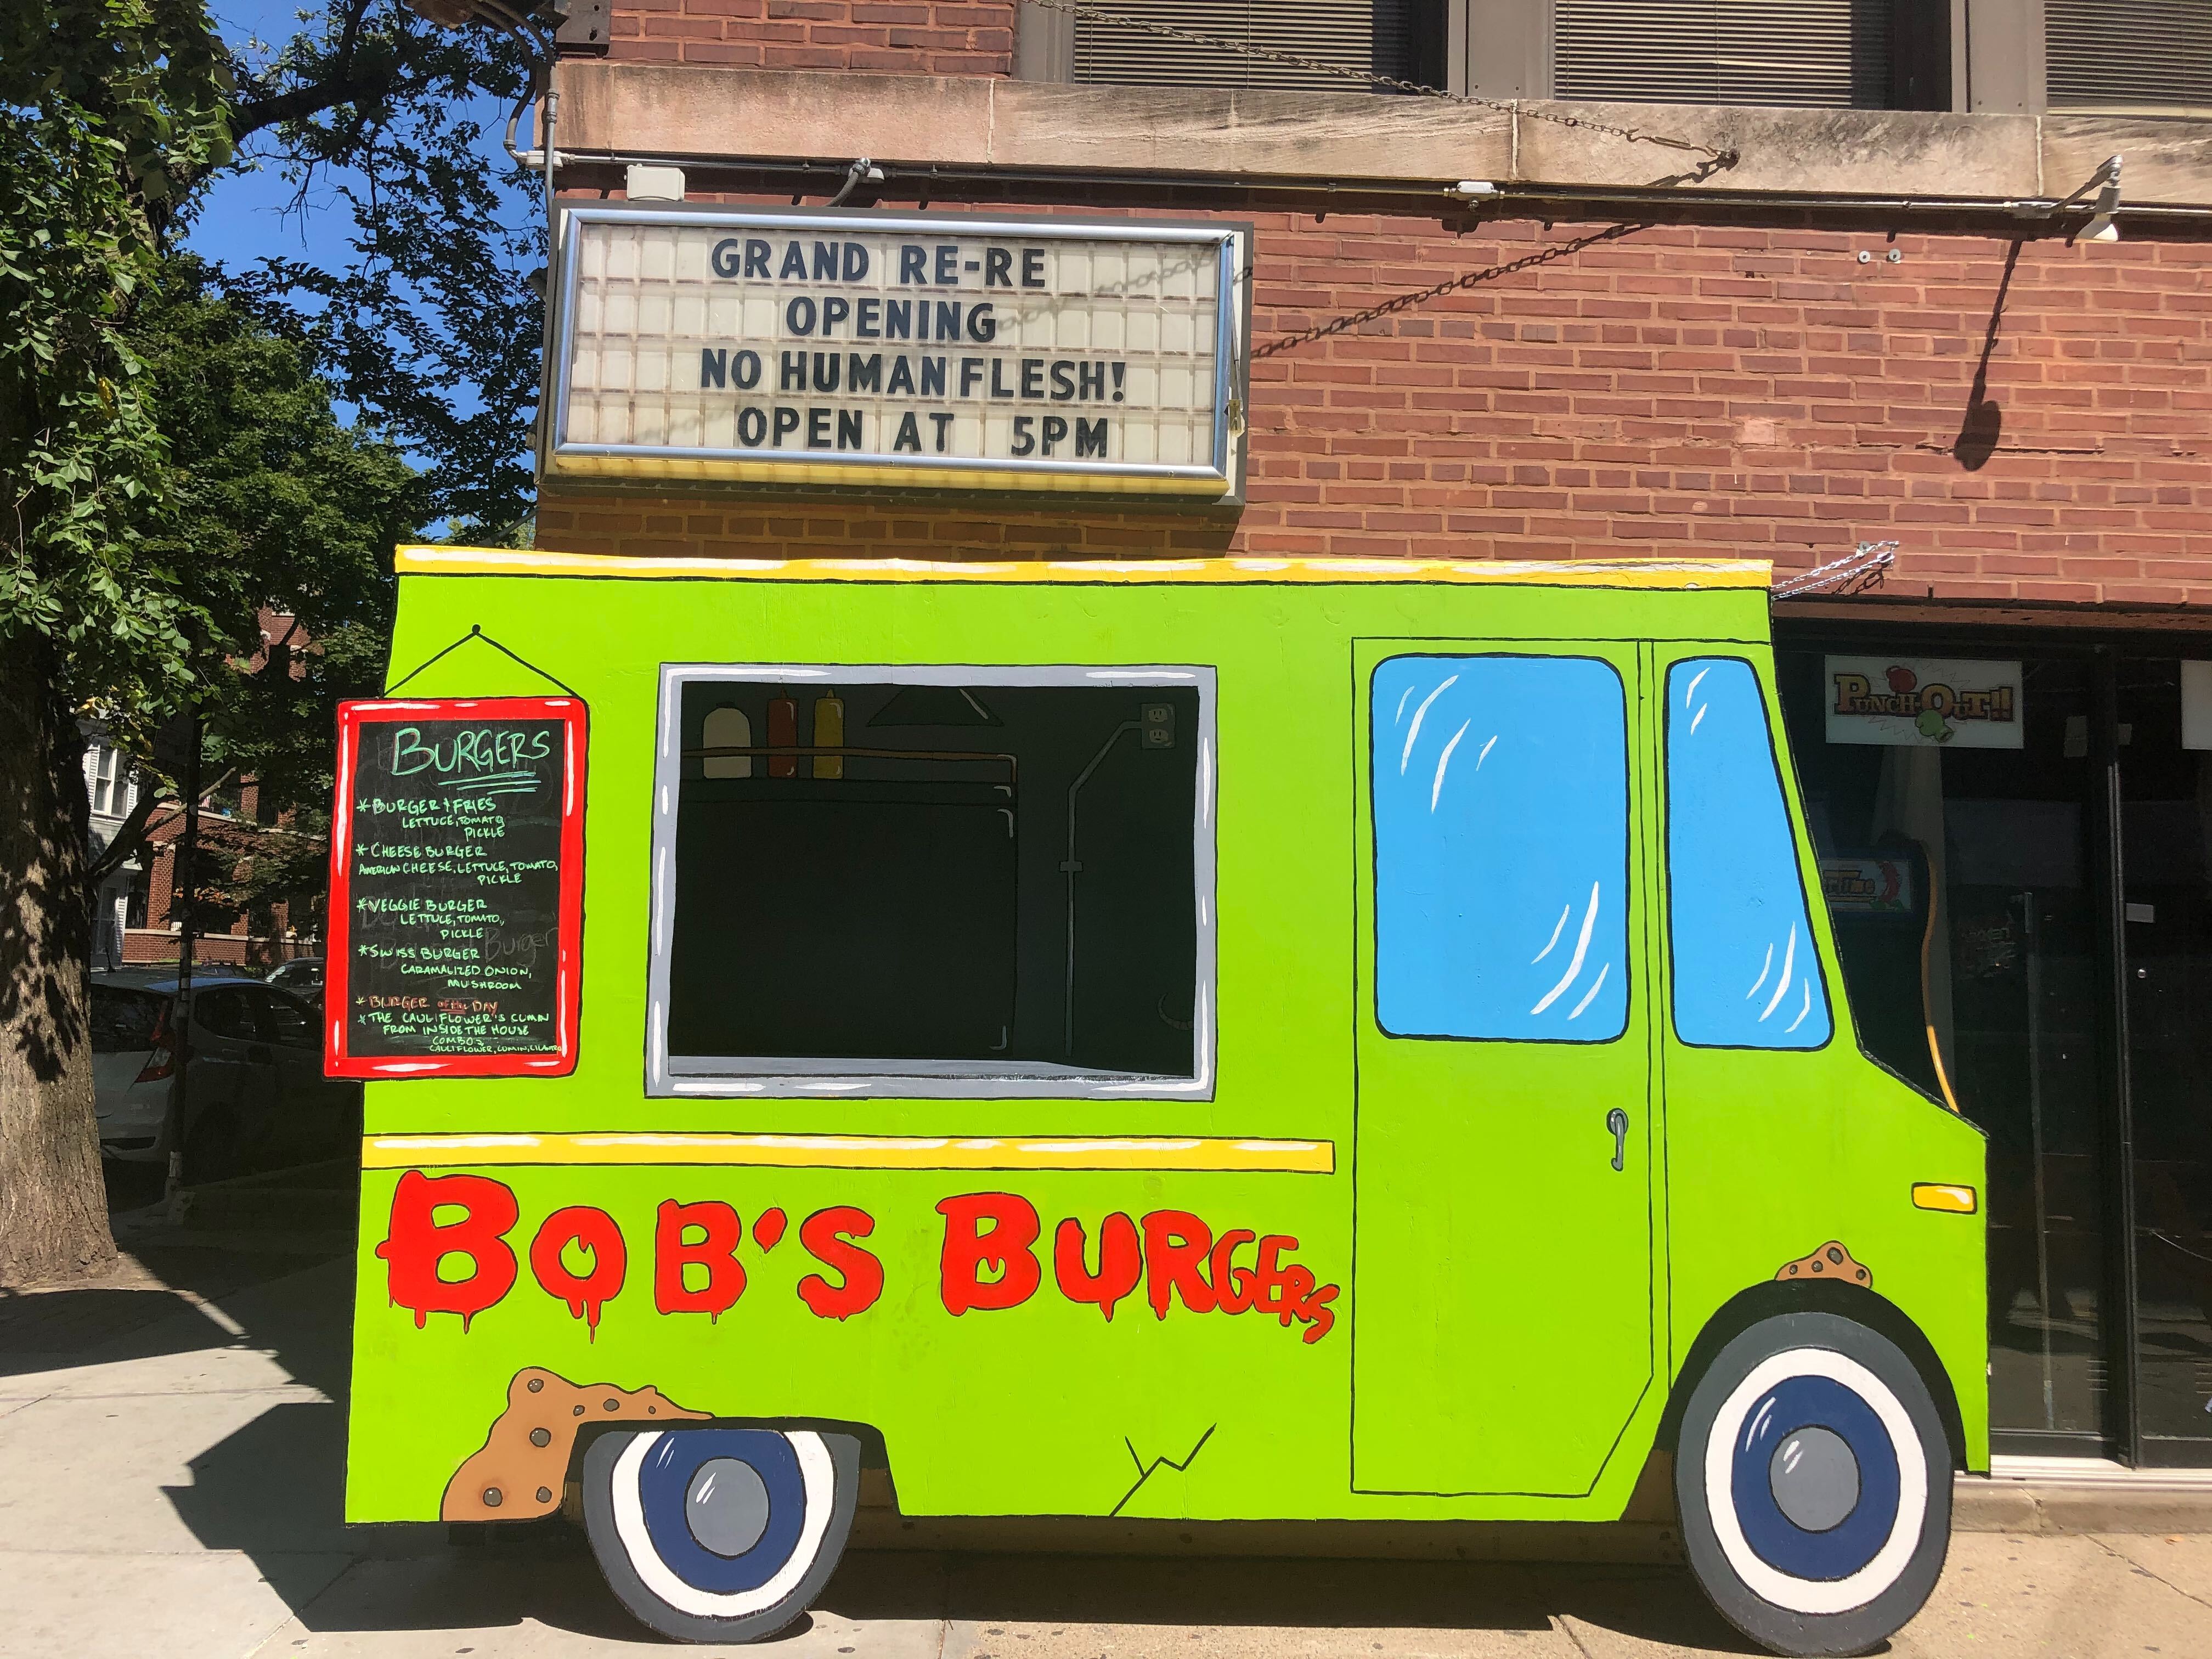 'Bob's Burgers' PopUp Comes To Replay Lincoln Park For 'Grand ReRe